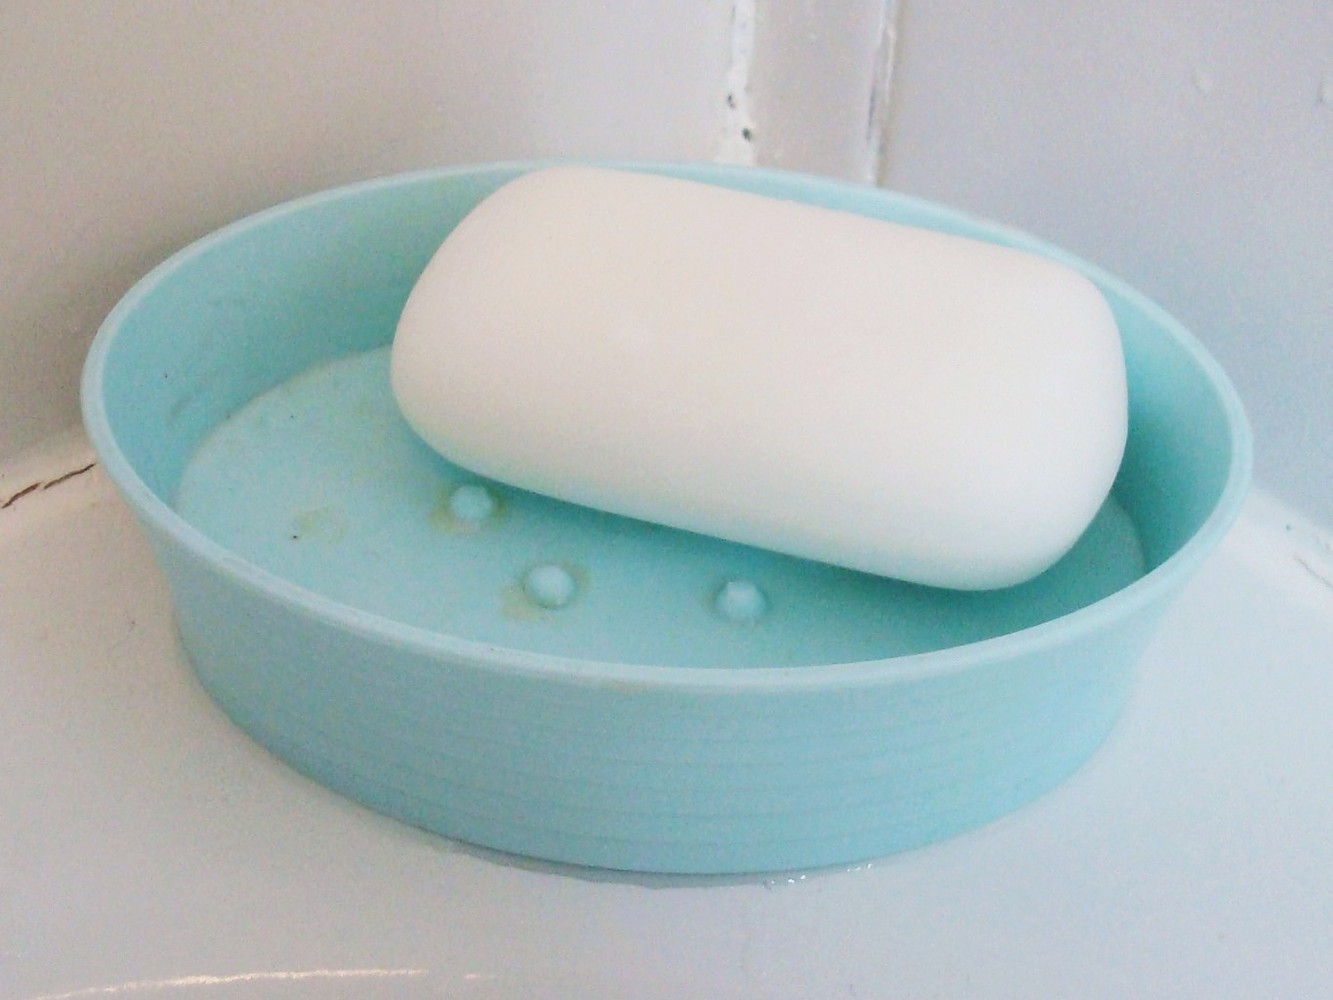 A white bar of soap in a light blue plastic soap dish.